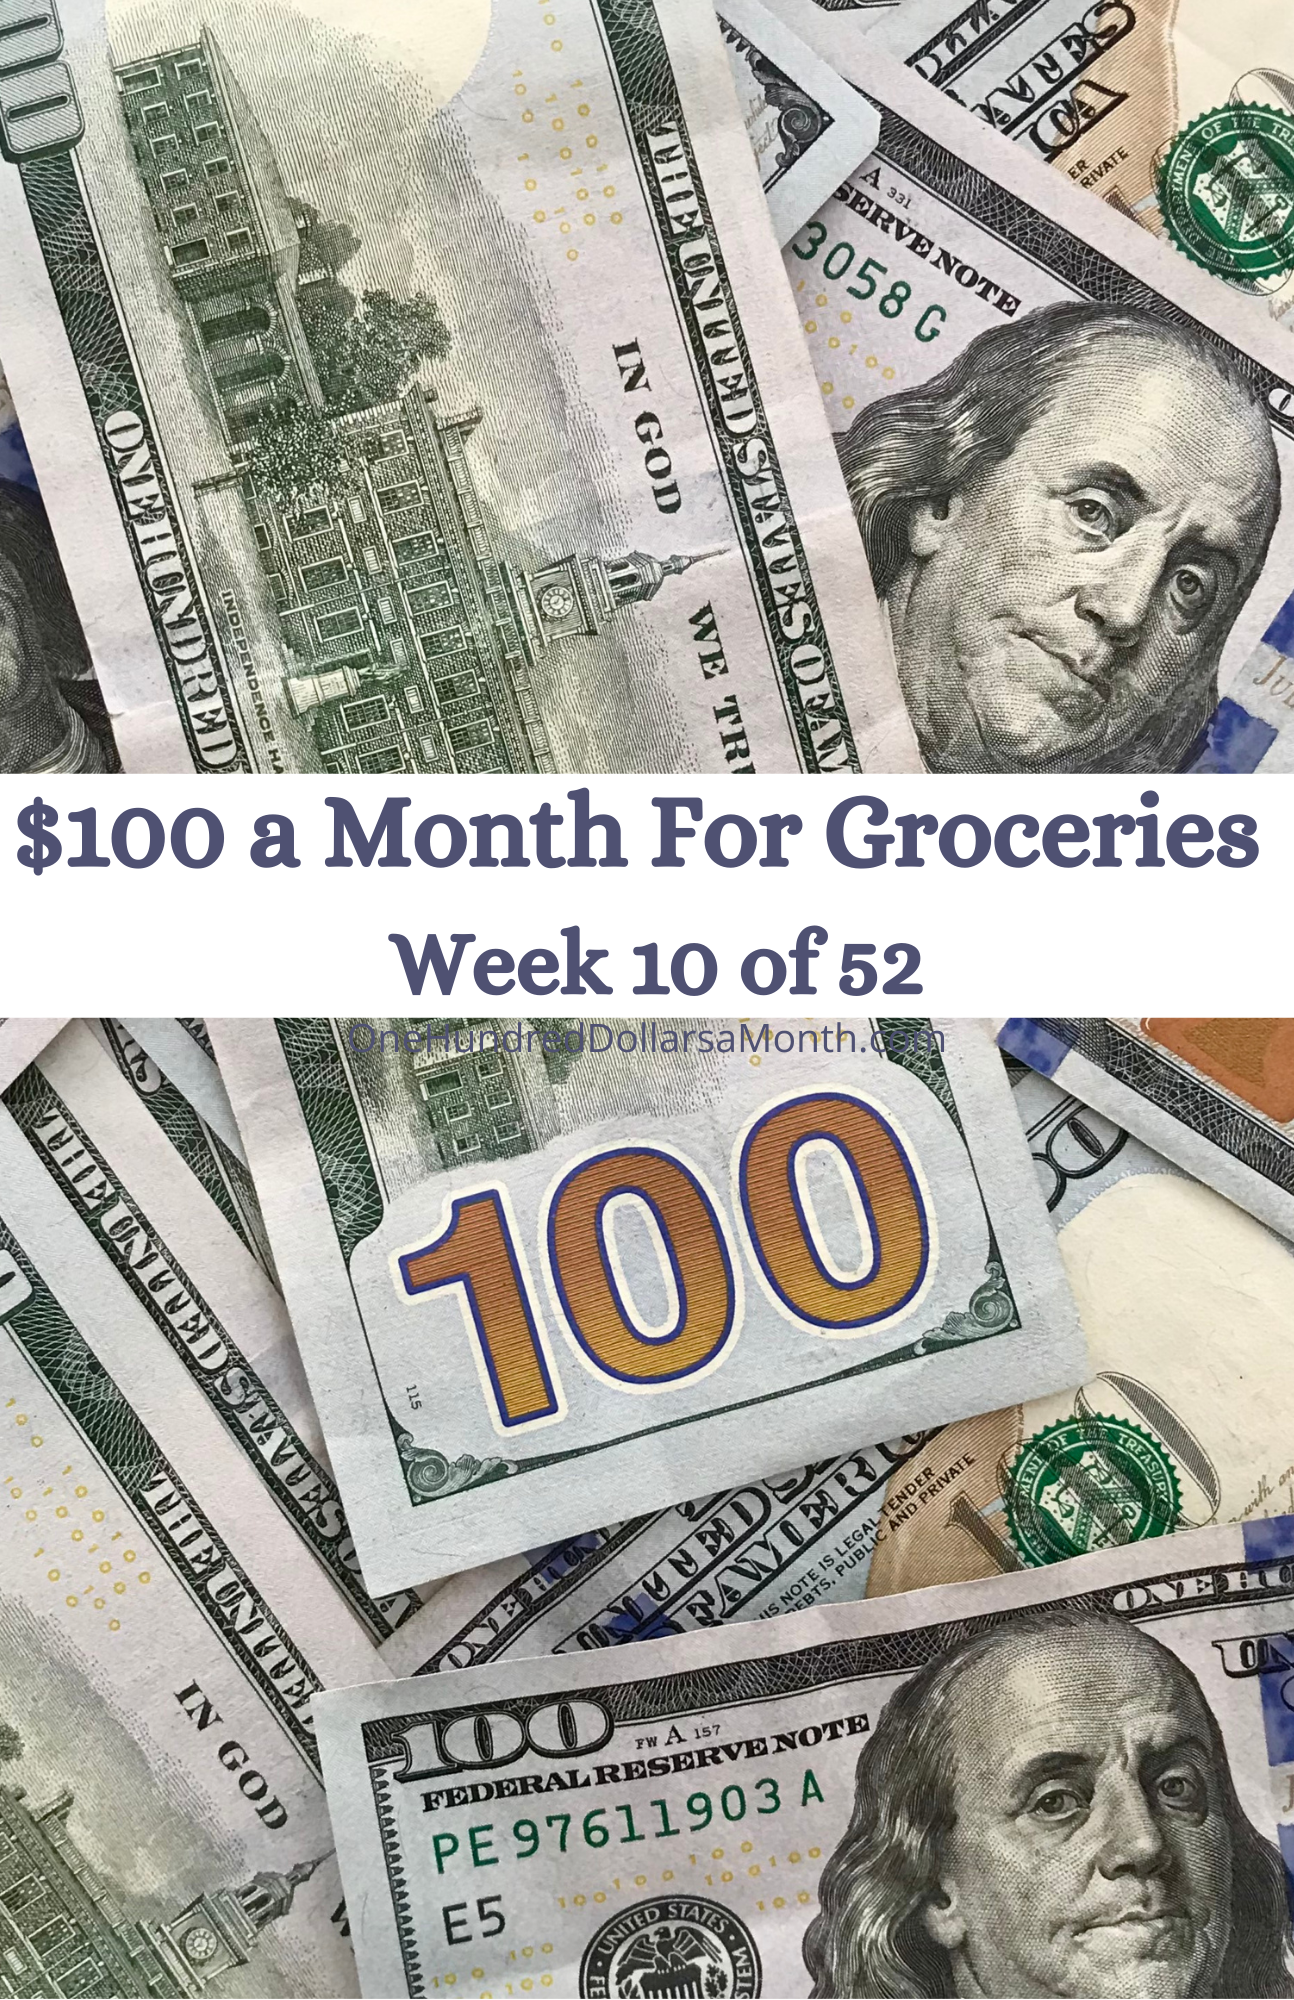 $100 a Month For Groceries – Week 10 of 52